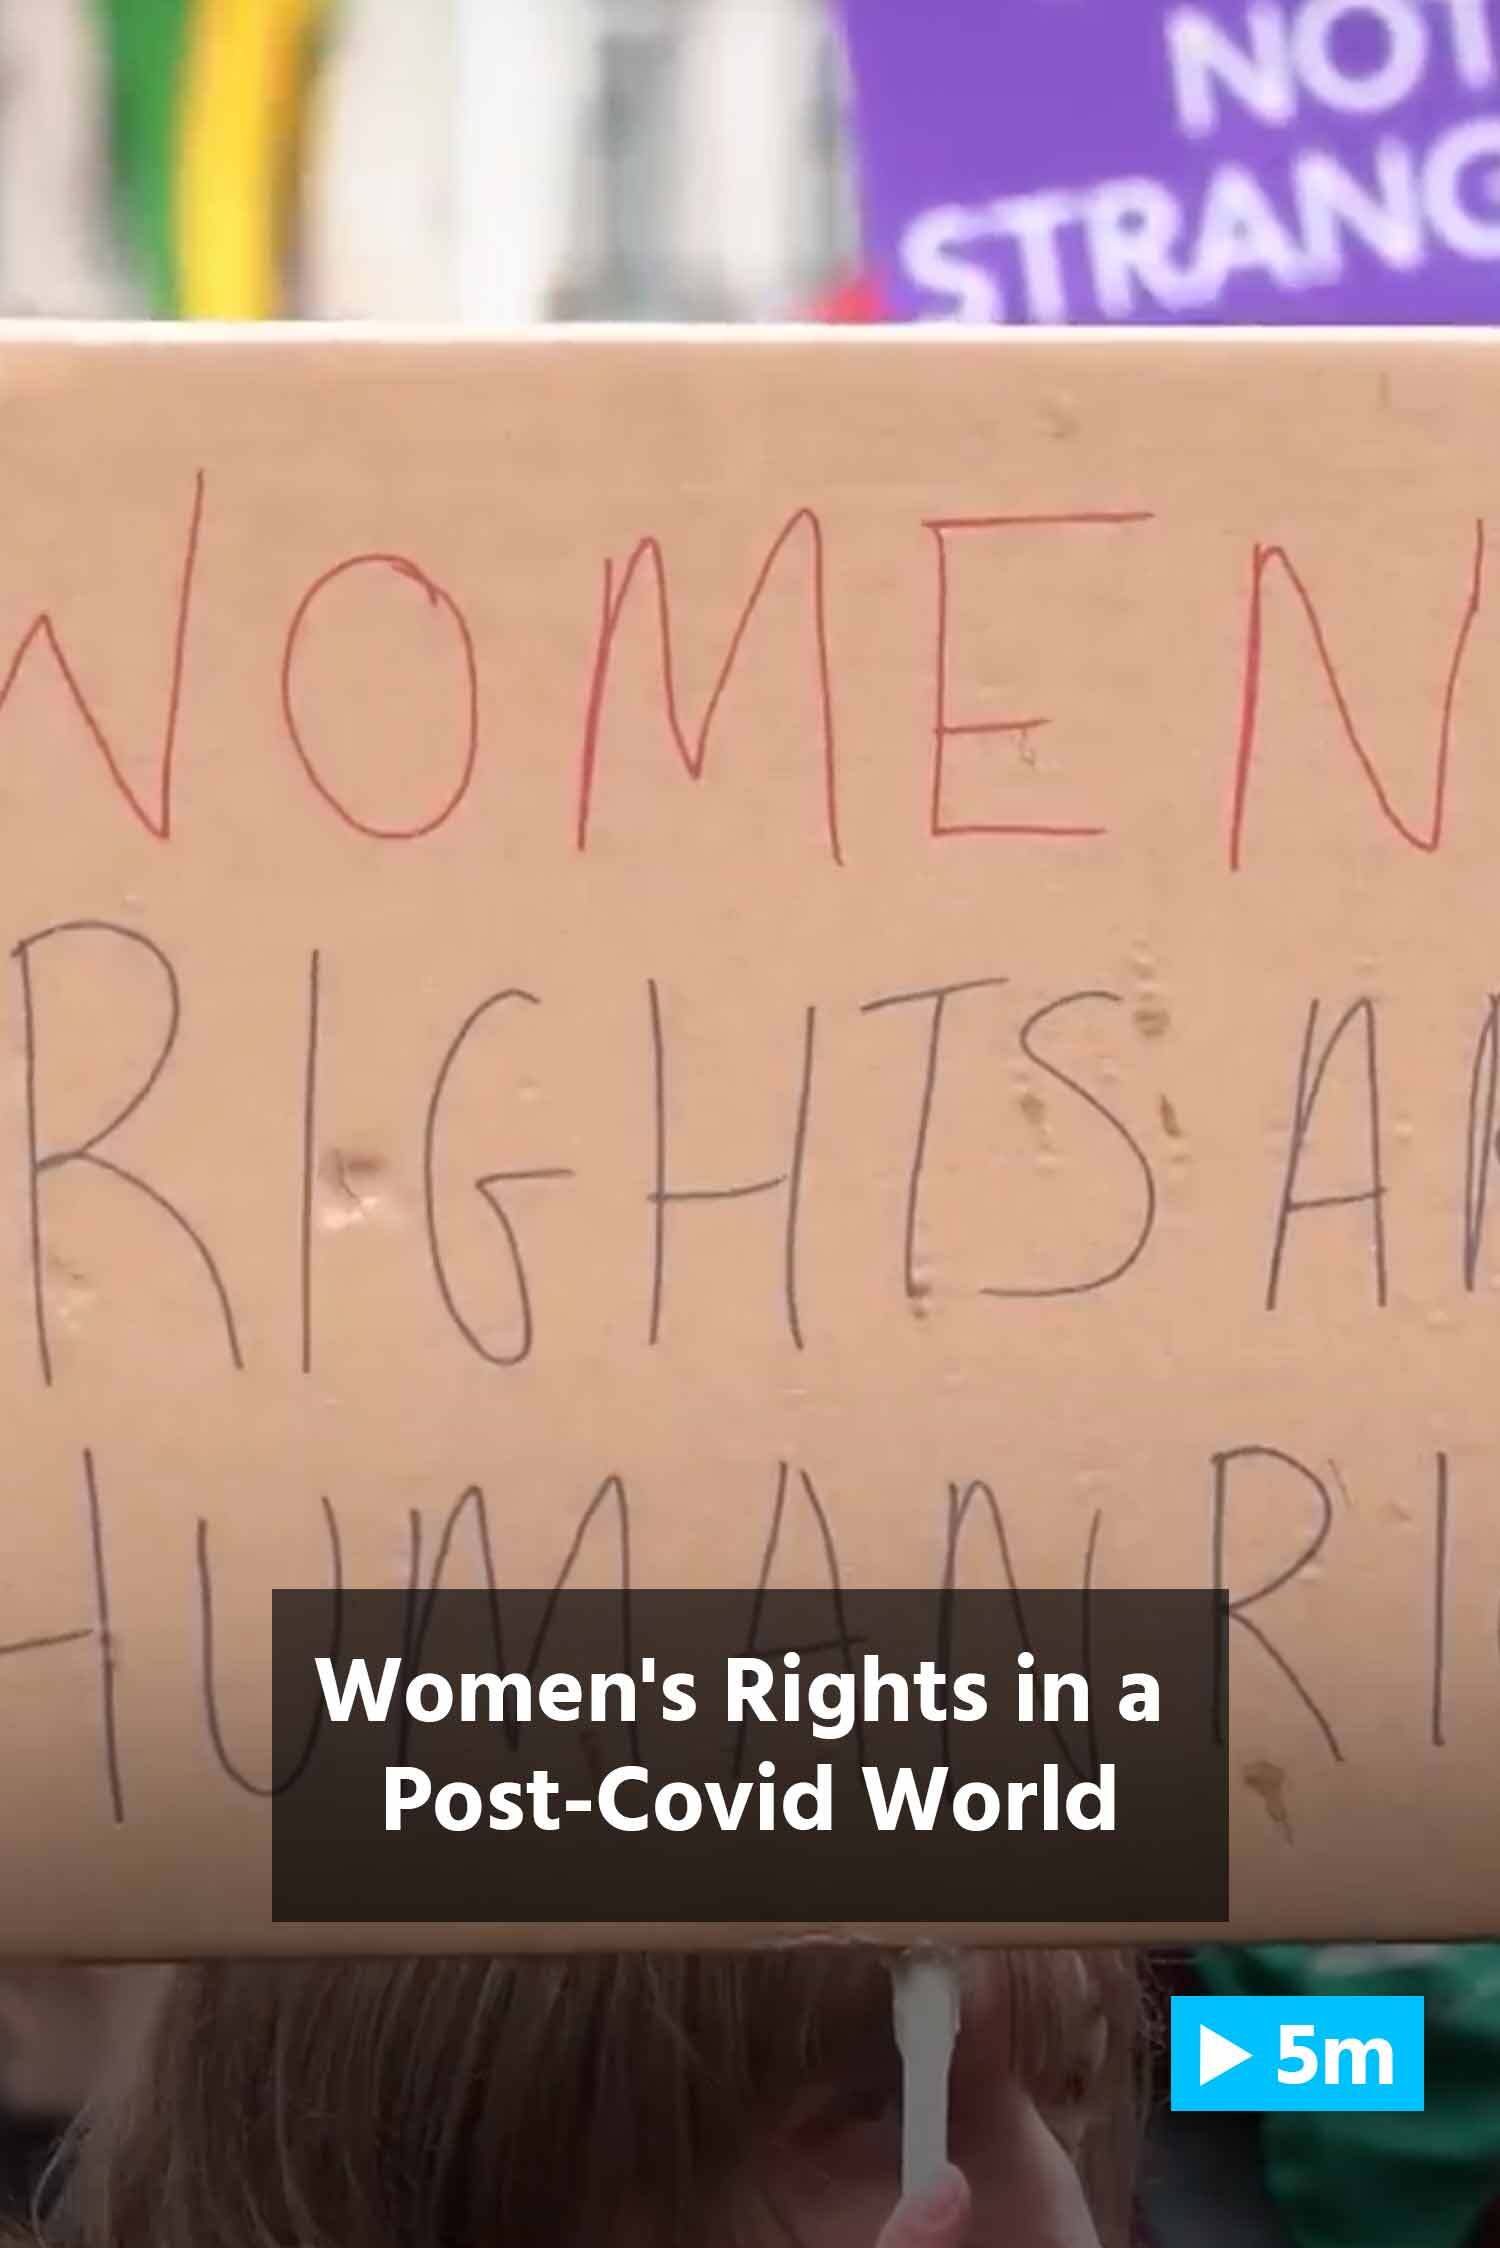 Reuters Report: Women's rights in a post-Covid world